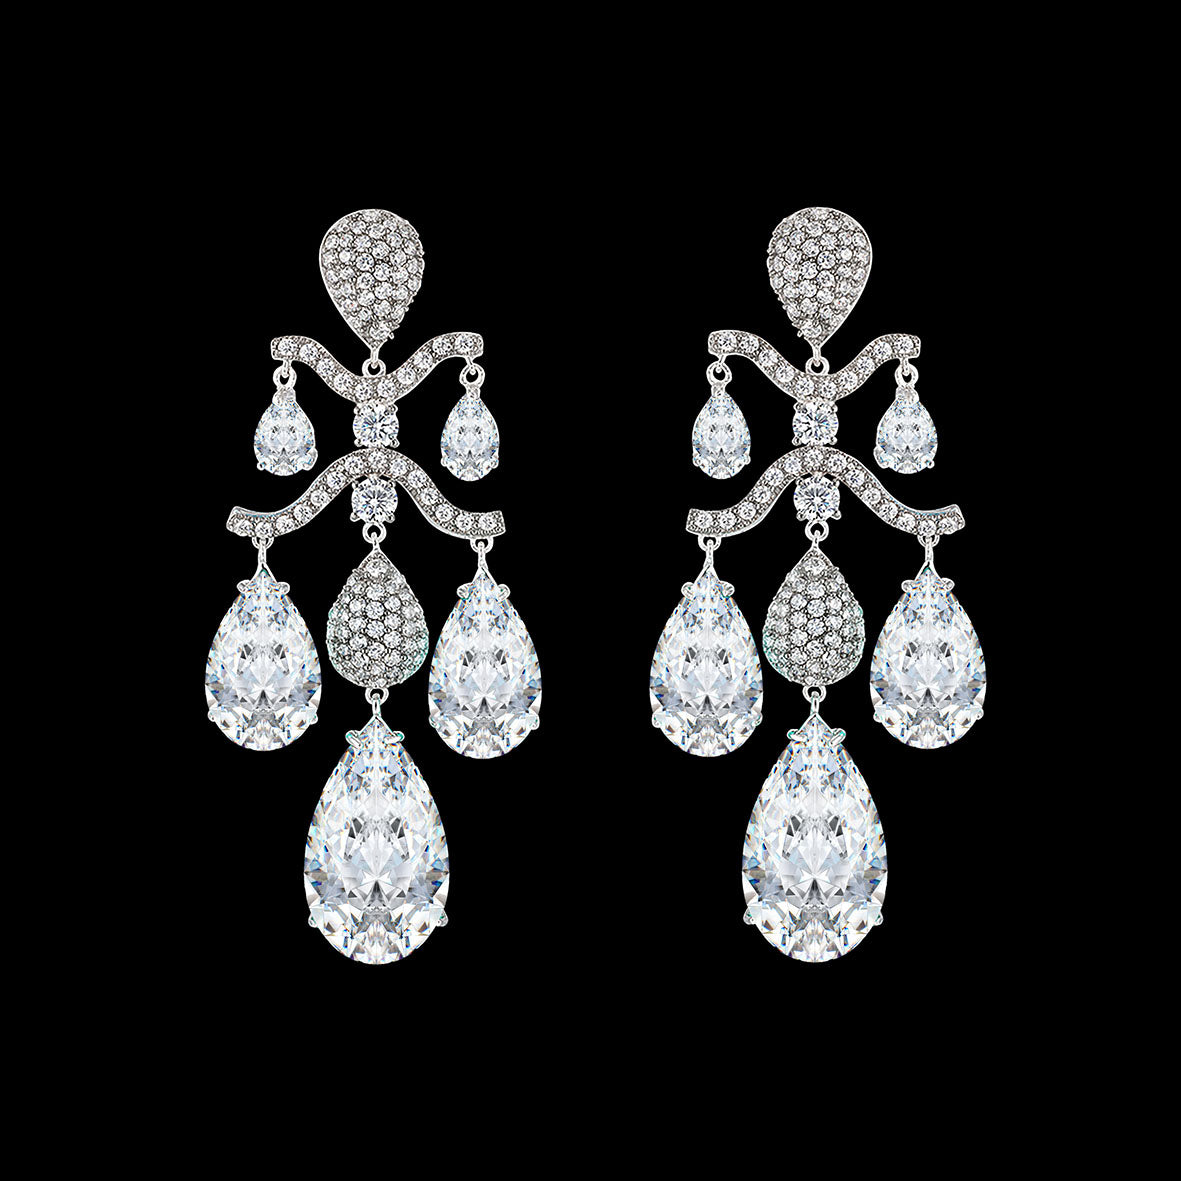 HEER - HOUSE OF JEWELLERY presents Cresent Moon Shaped Earrings available  exclusively at FEI